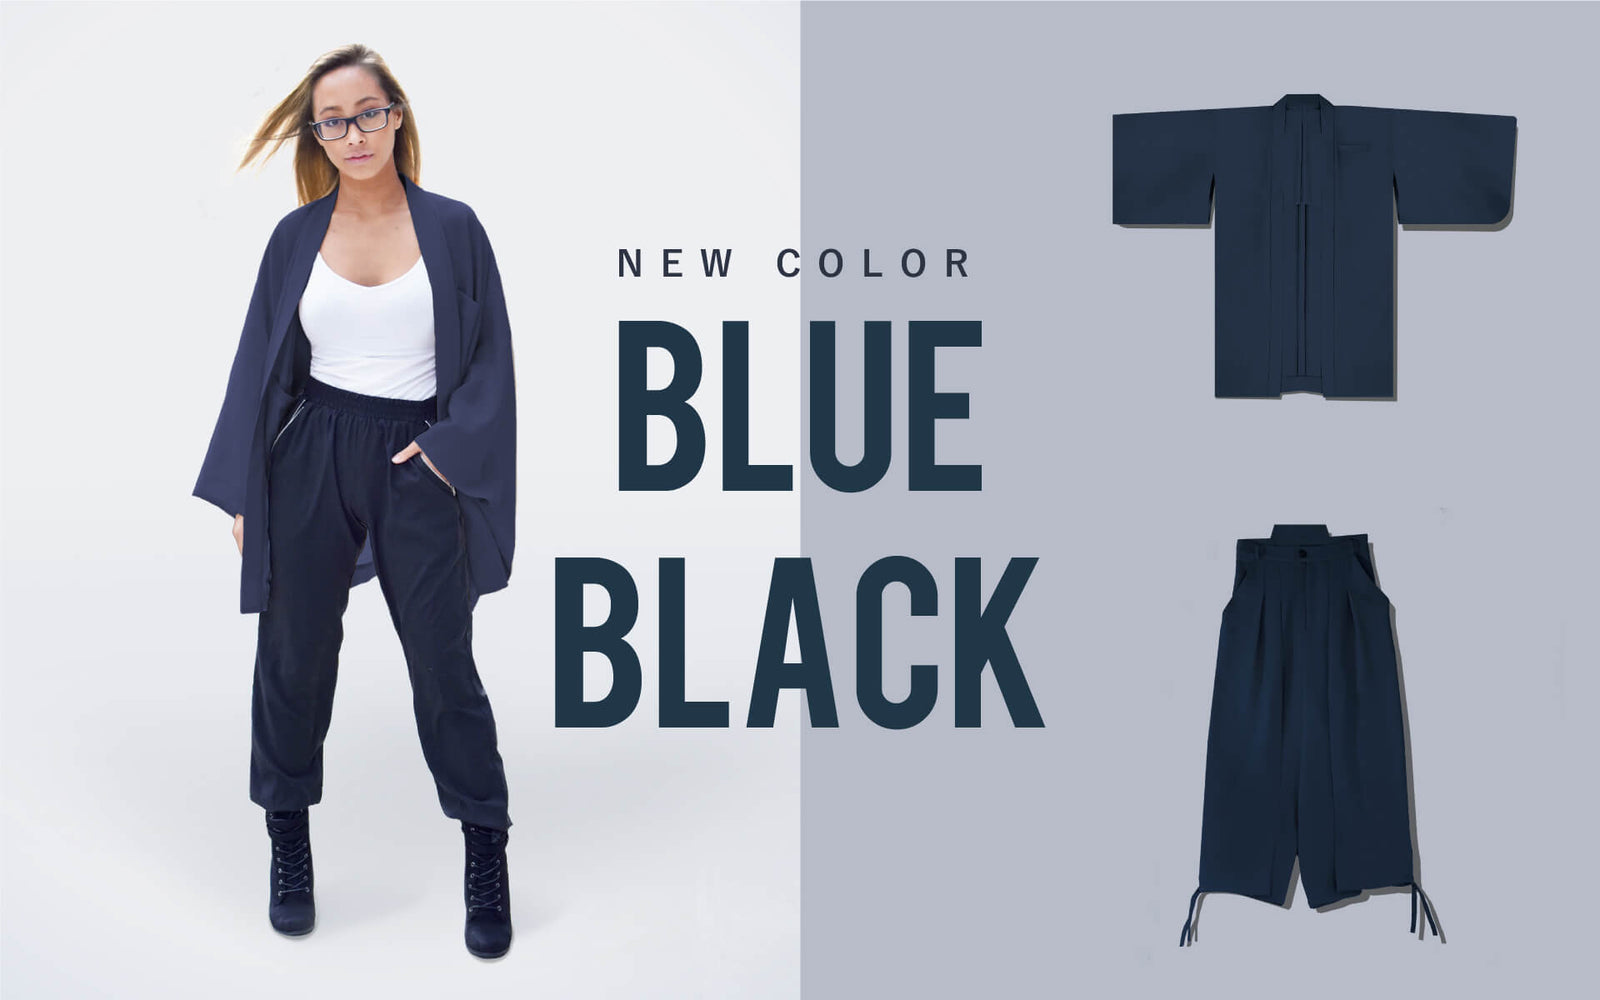 New color Blue black is available for Samurai Mode Jacket and Pants - KUDEN by TAKAHIRO SATO